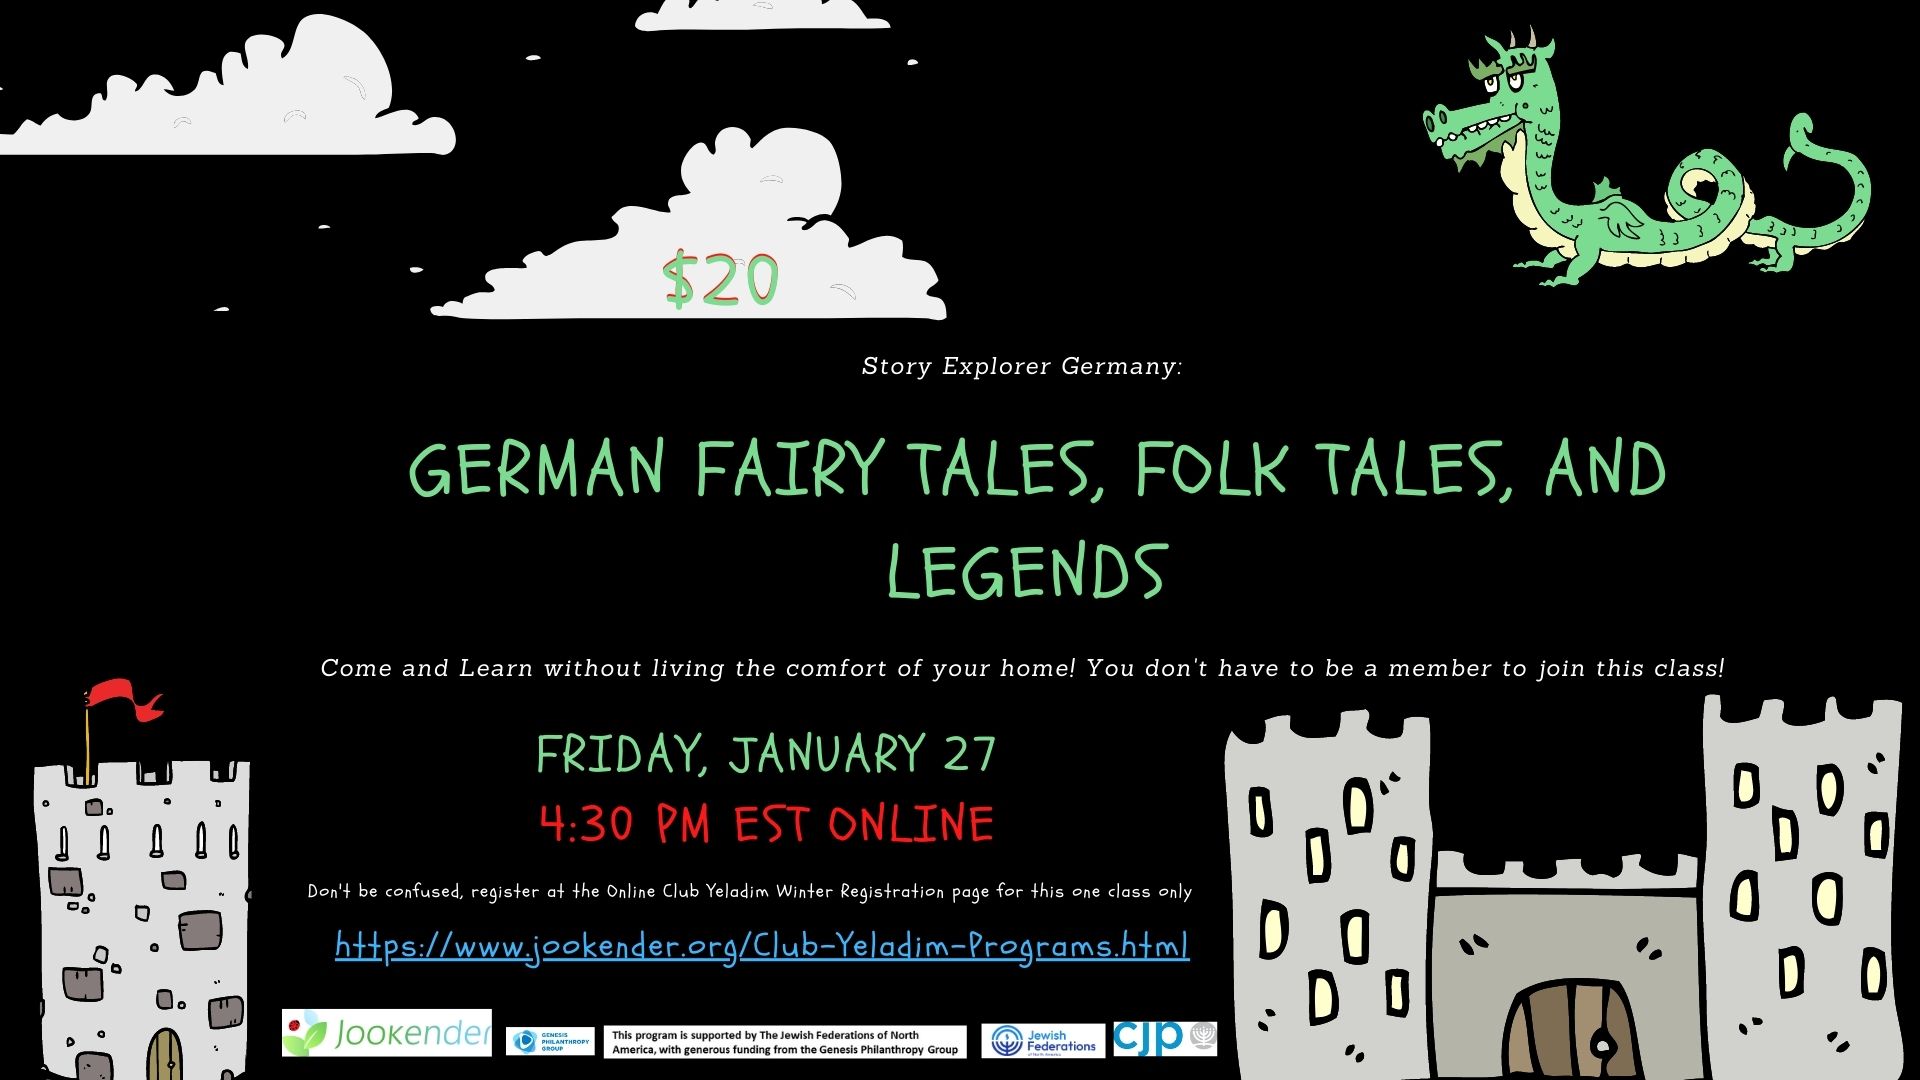 Story Explorer Germany: German Fairy Tales, Folk Tales, and Legends (8-13 y.o.) - One time, January 27